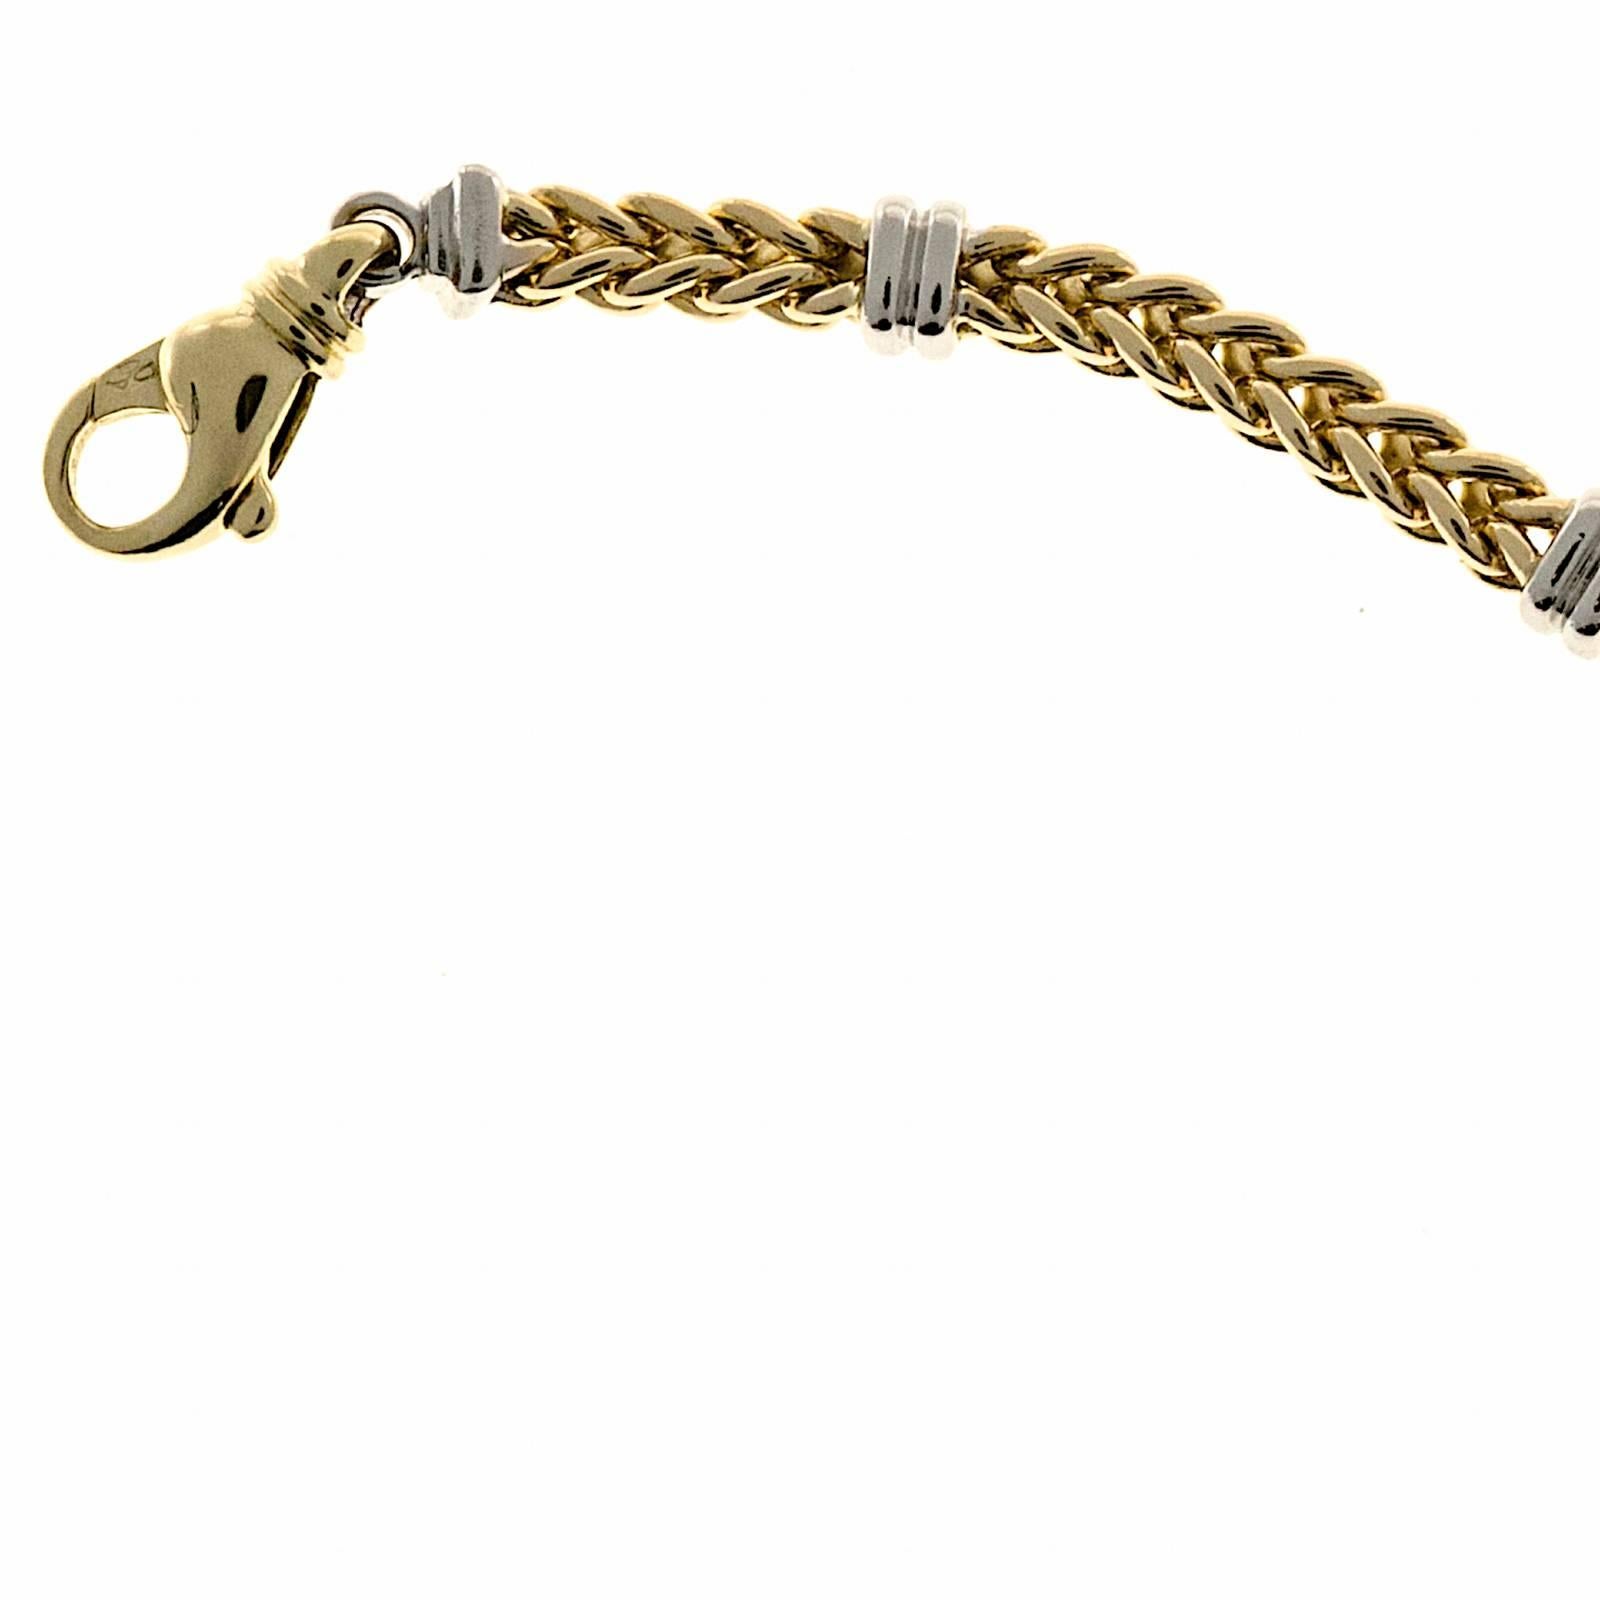 Italian made heavy solid yellow gold bracelet with white bars made by DAG. Circa 1970

14k Yellow and white gold
Length: 7.5 Inches
Bars: 6.62mm or .26 inch
Chain: 4.86mm or .12 inch
Depth: 4.21mm
27.2 grams
Tested: 14k
Stamped: 14k Italy
Hallmark: